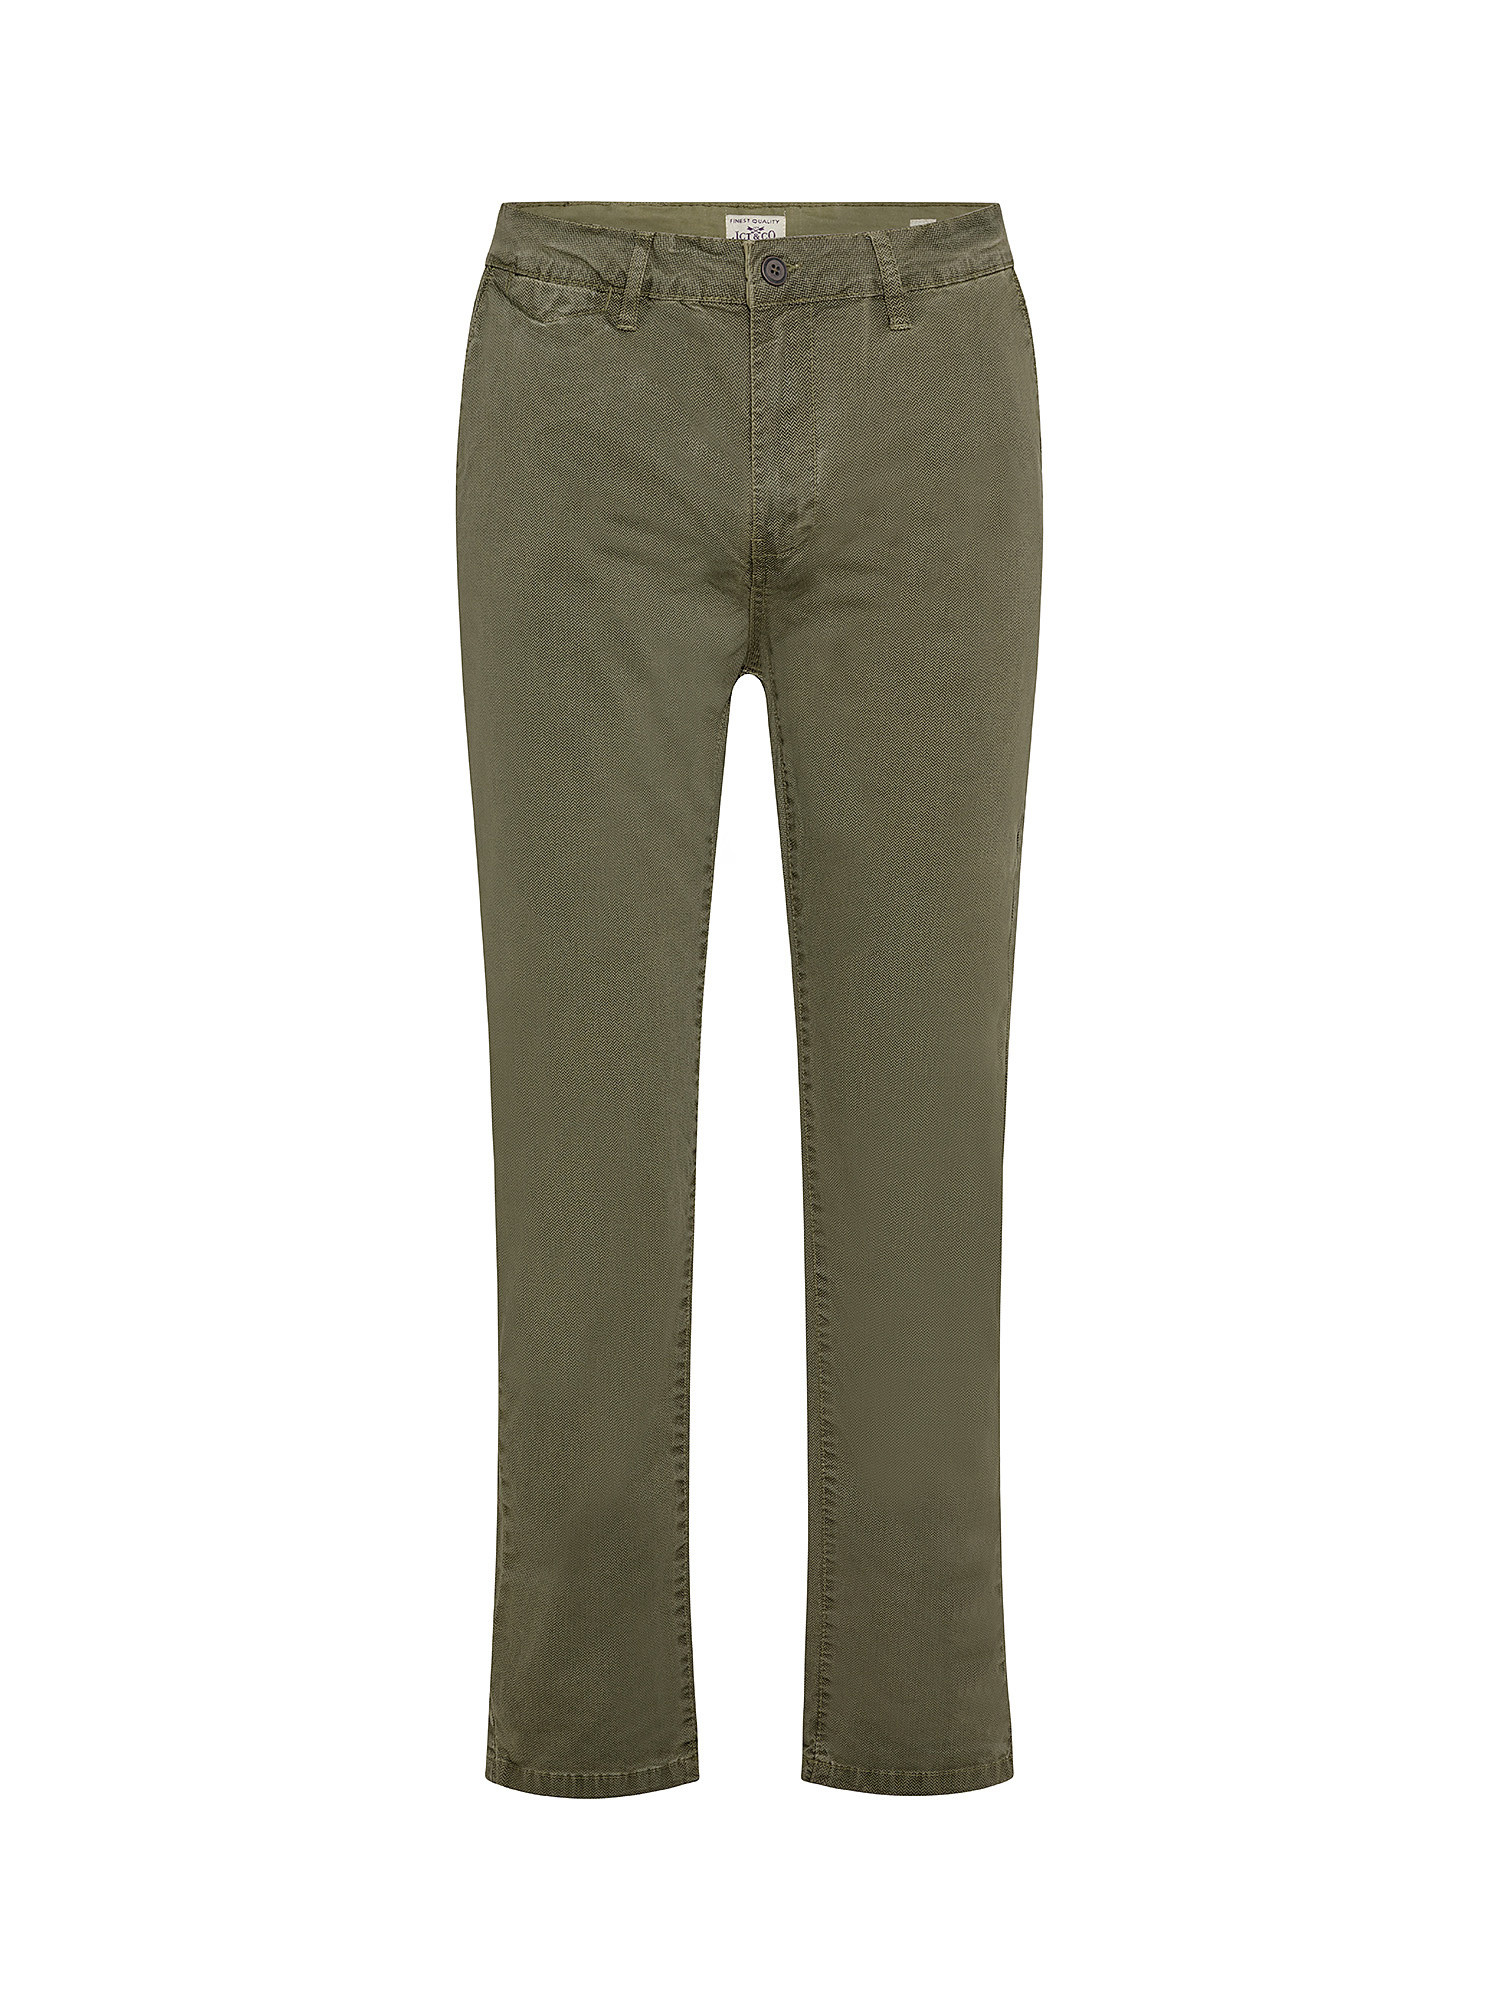 Pantalone chinos cotone stretch, Verde, large image number 0